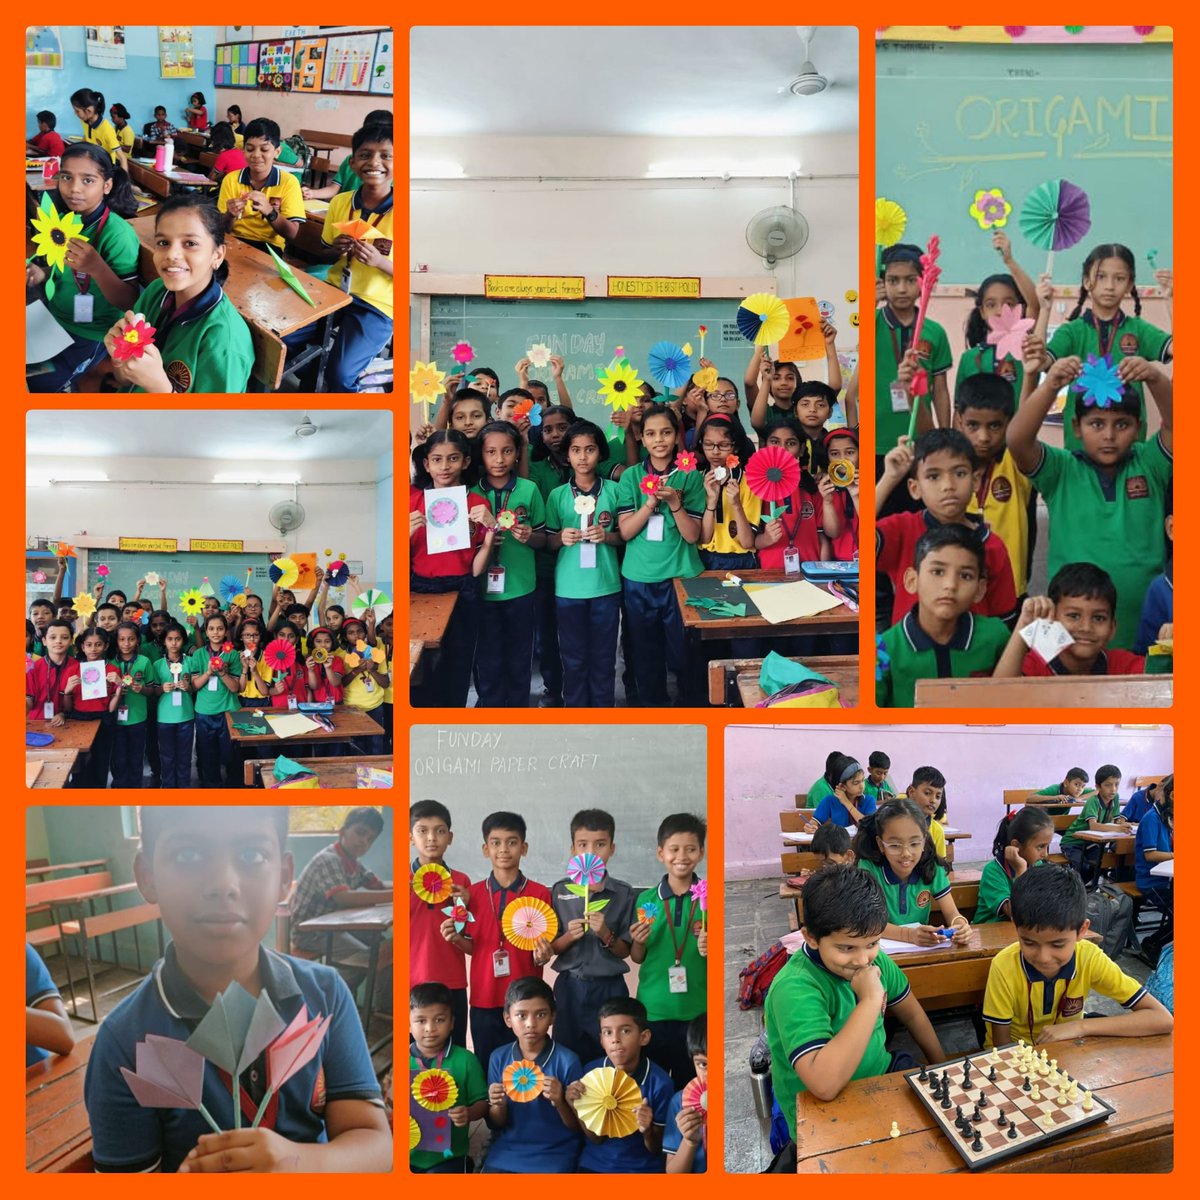 '🌸✂️ Fun Day @kv2_afspune today! 🎉 Kids are getting creative with origami and flower-making activities. The room is buzzing with laughter and concentration as they craft beautiful creations. It's inspiring to see their imagination bloom! #CreativeLearning' @KvsMumbai @KVS_HQ